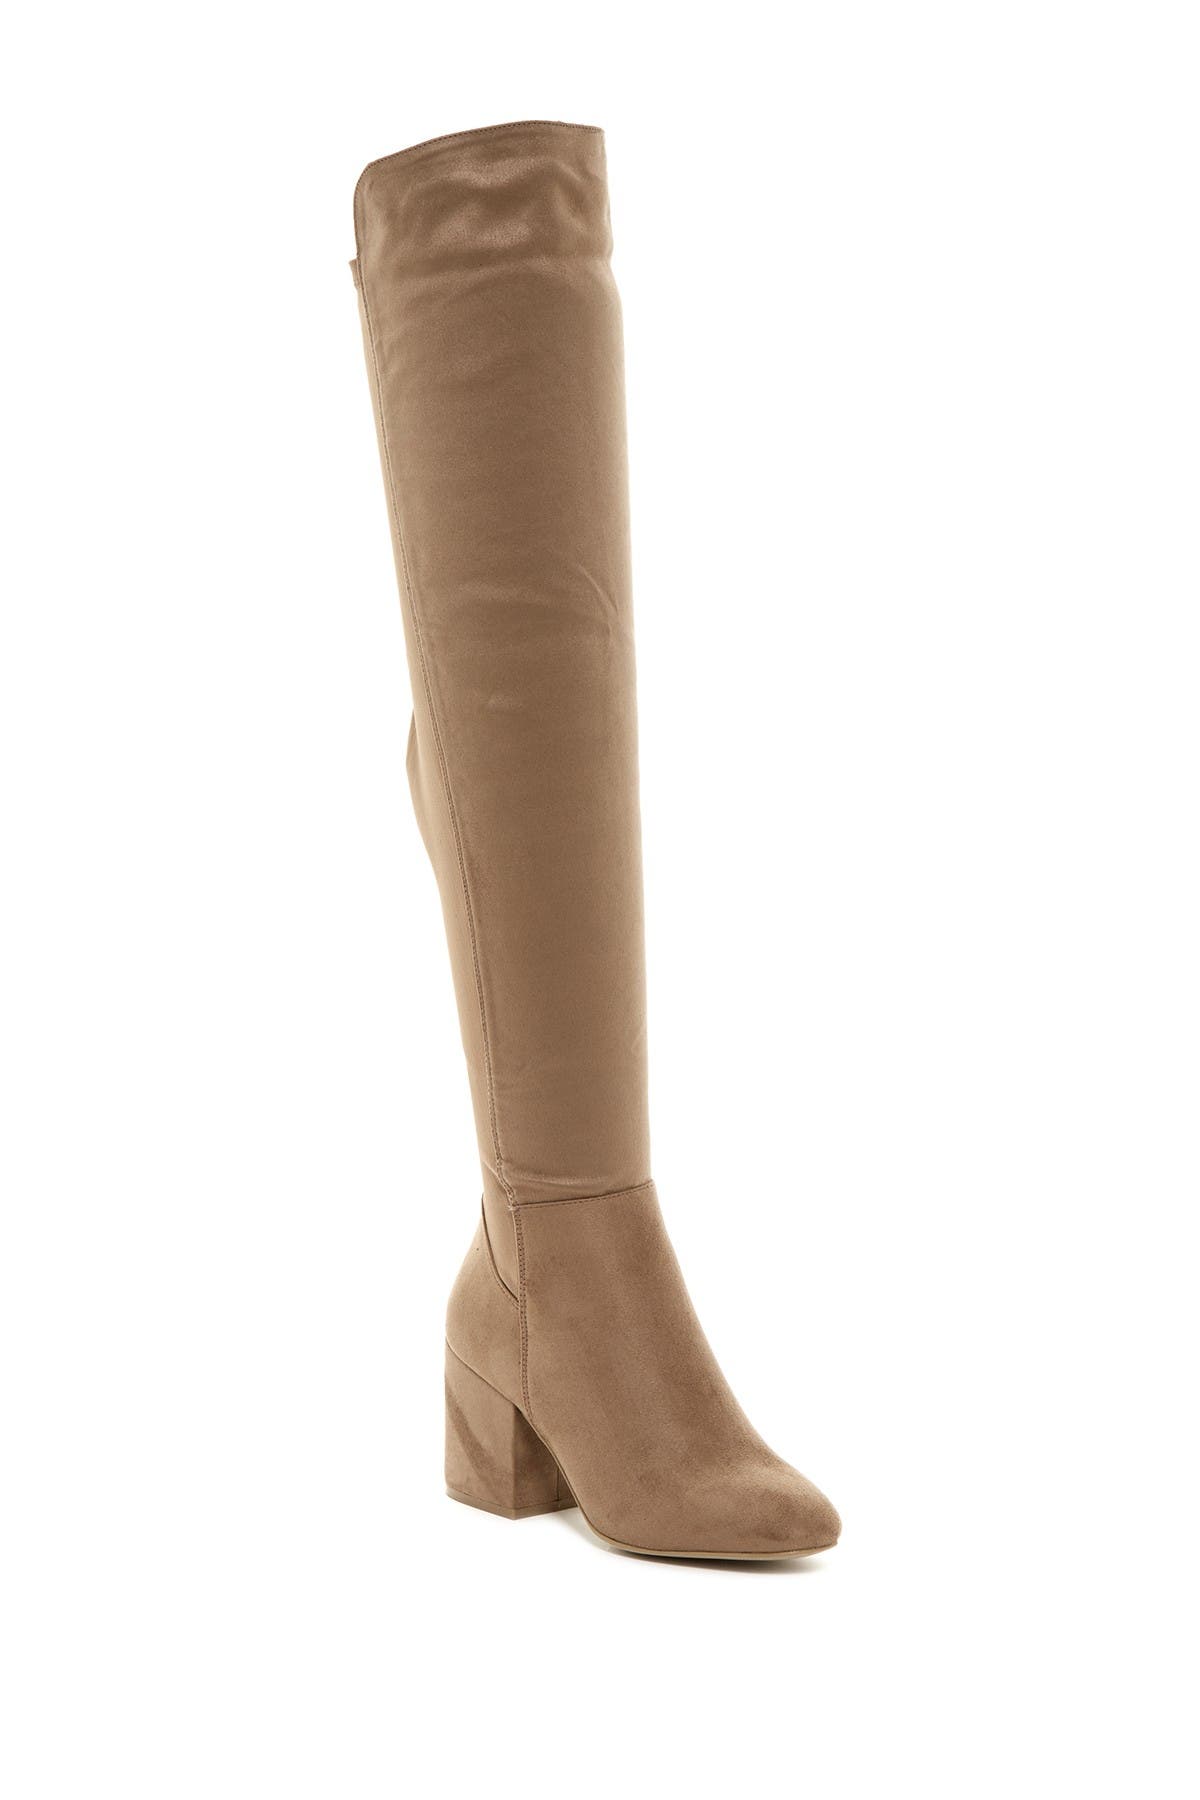 wild diva over the knee boots